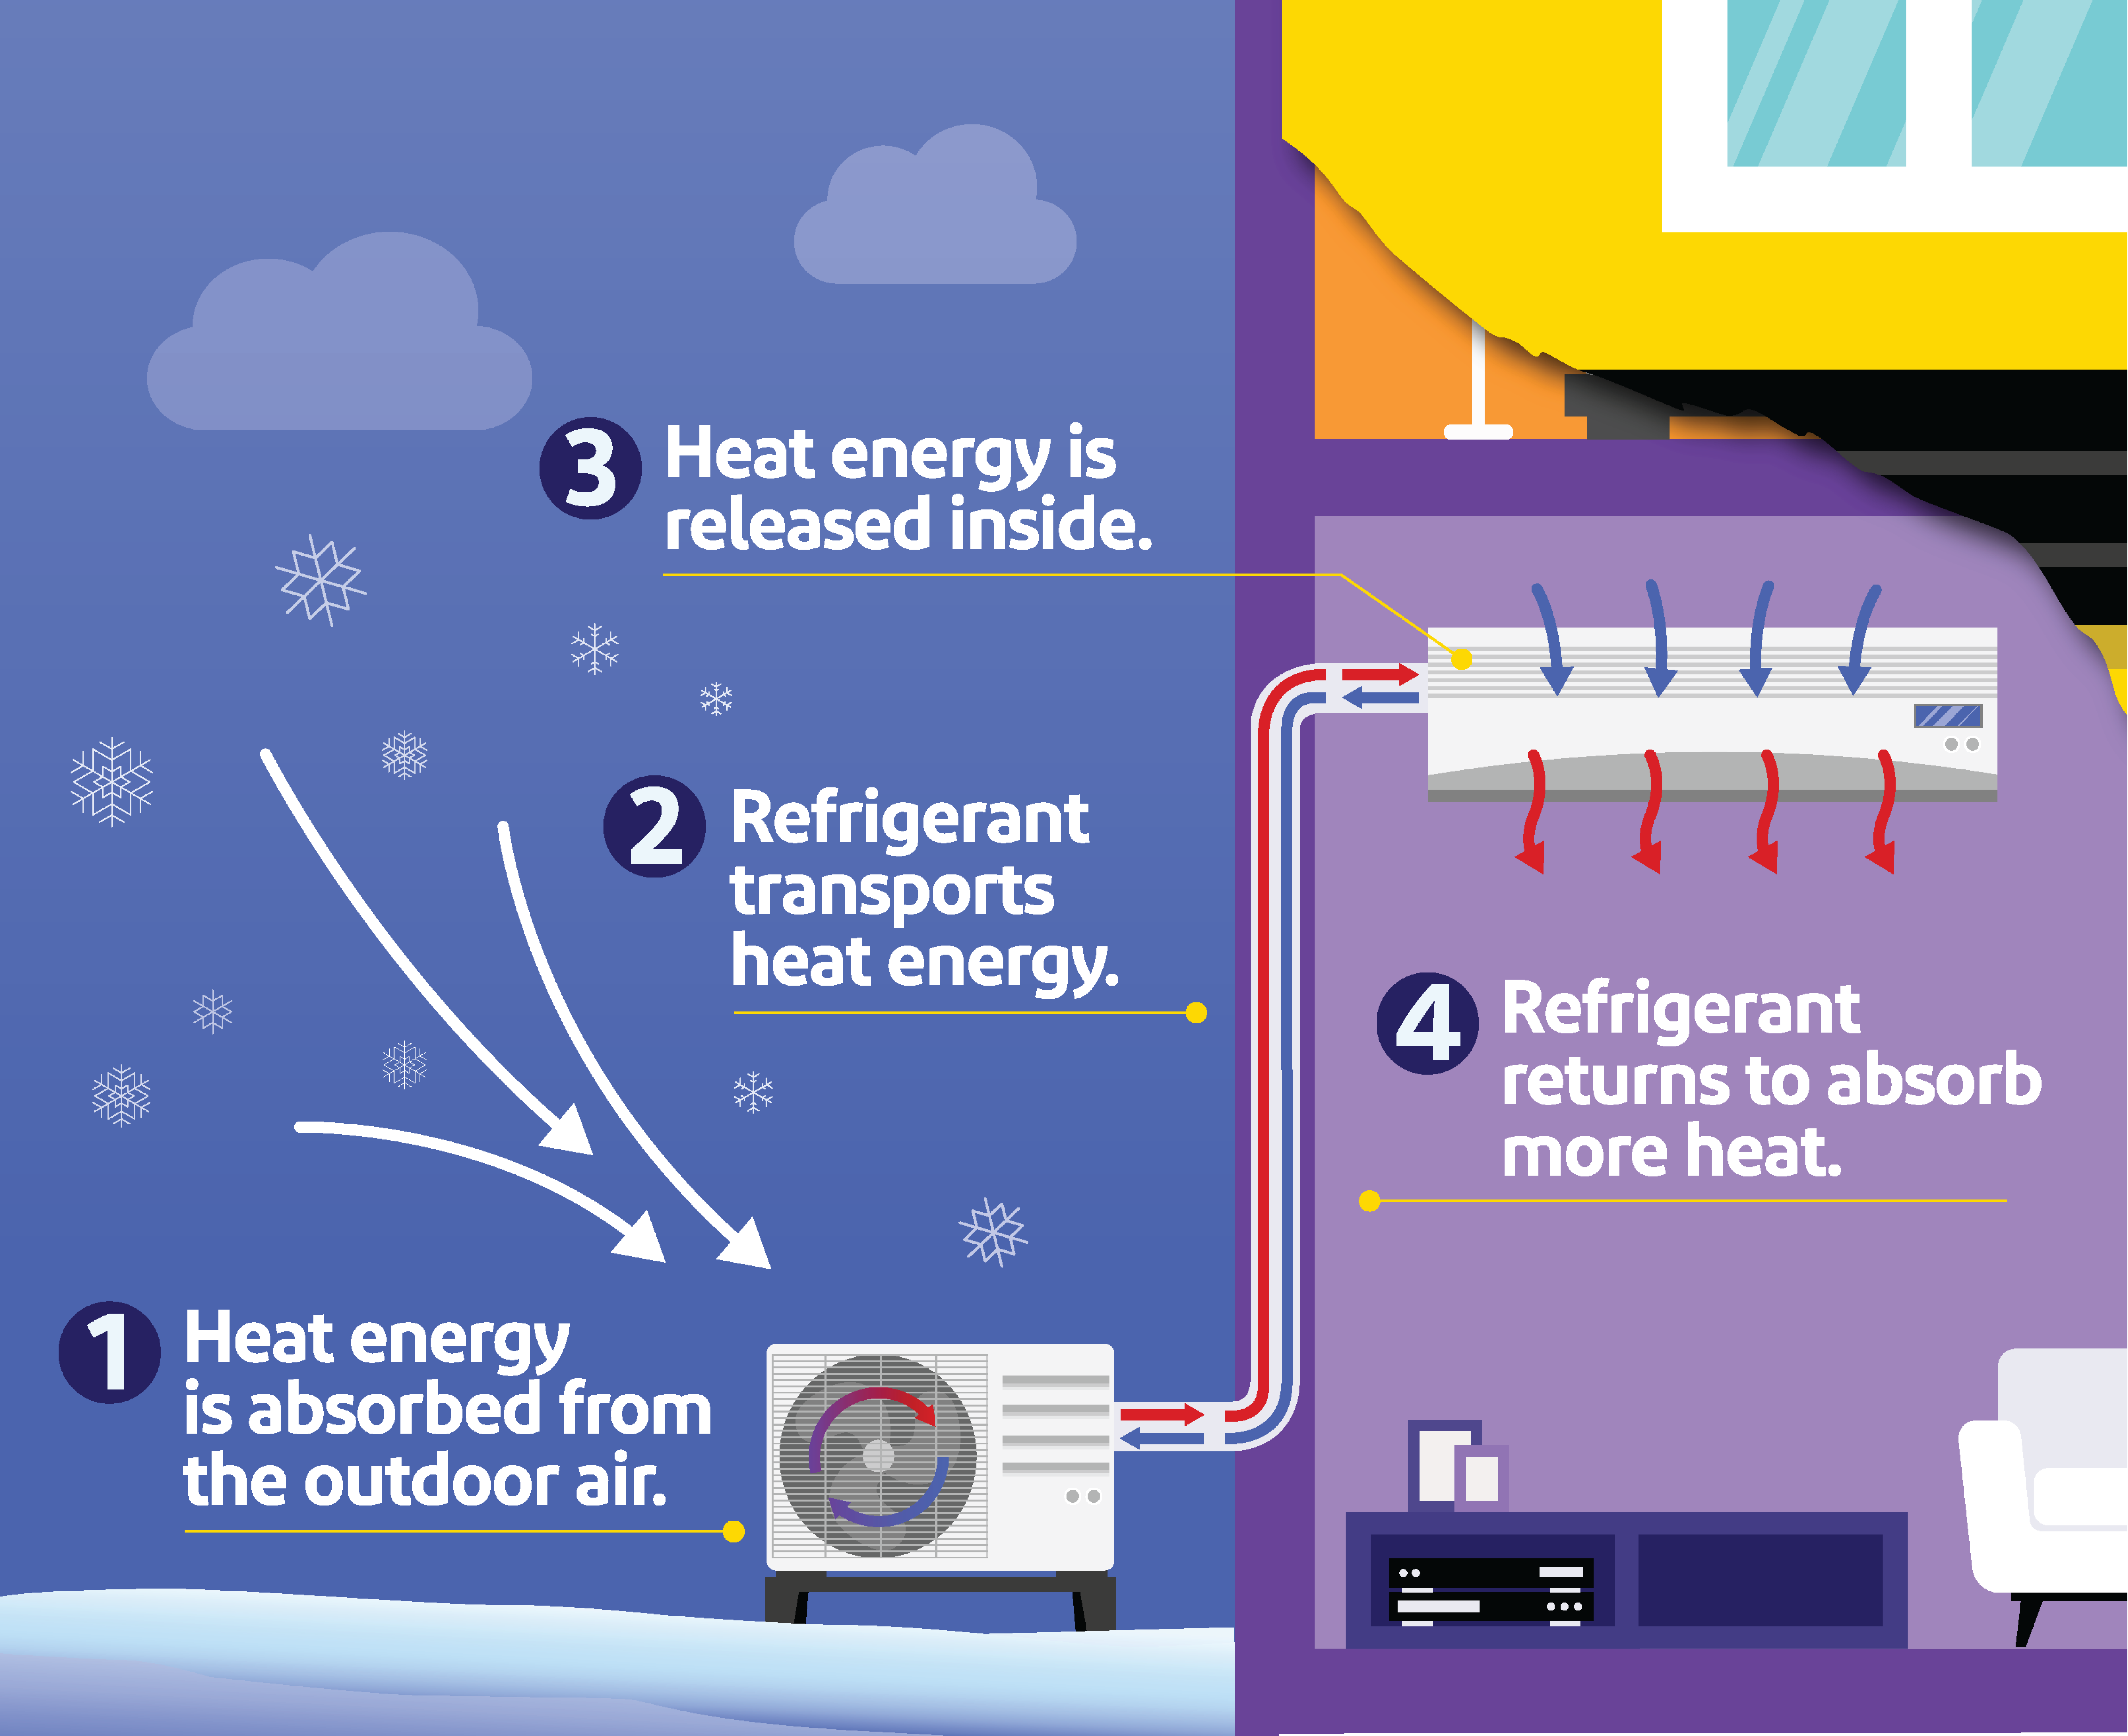 A graphic depicting how heat pumps work. In cold months, heat energy is absorbed from the outdoor air through a heat pump outdoor unit. Refrigerant then transports heat energy through refrigerant lines, where the heat energy is released inside via a heat pump indoor unit. Then the refrigerant returns outside to absorb more heat.